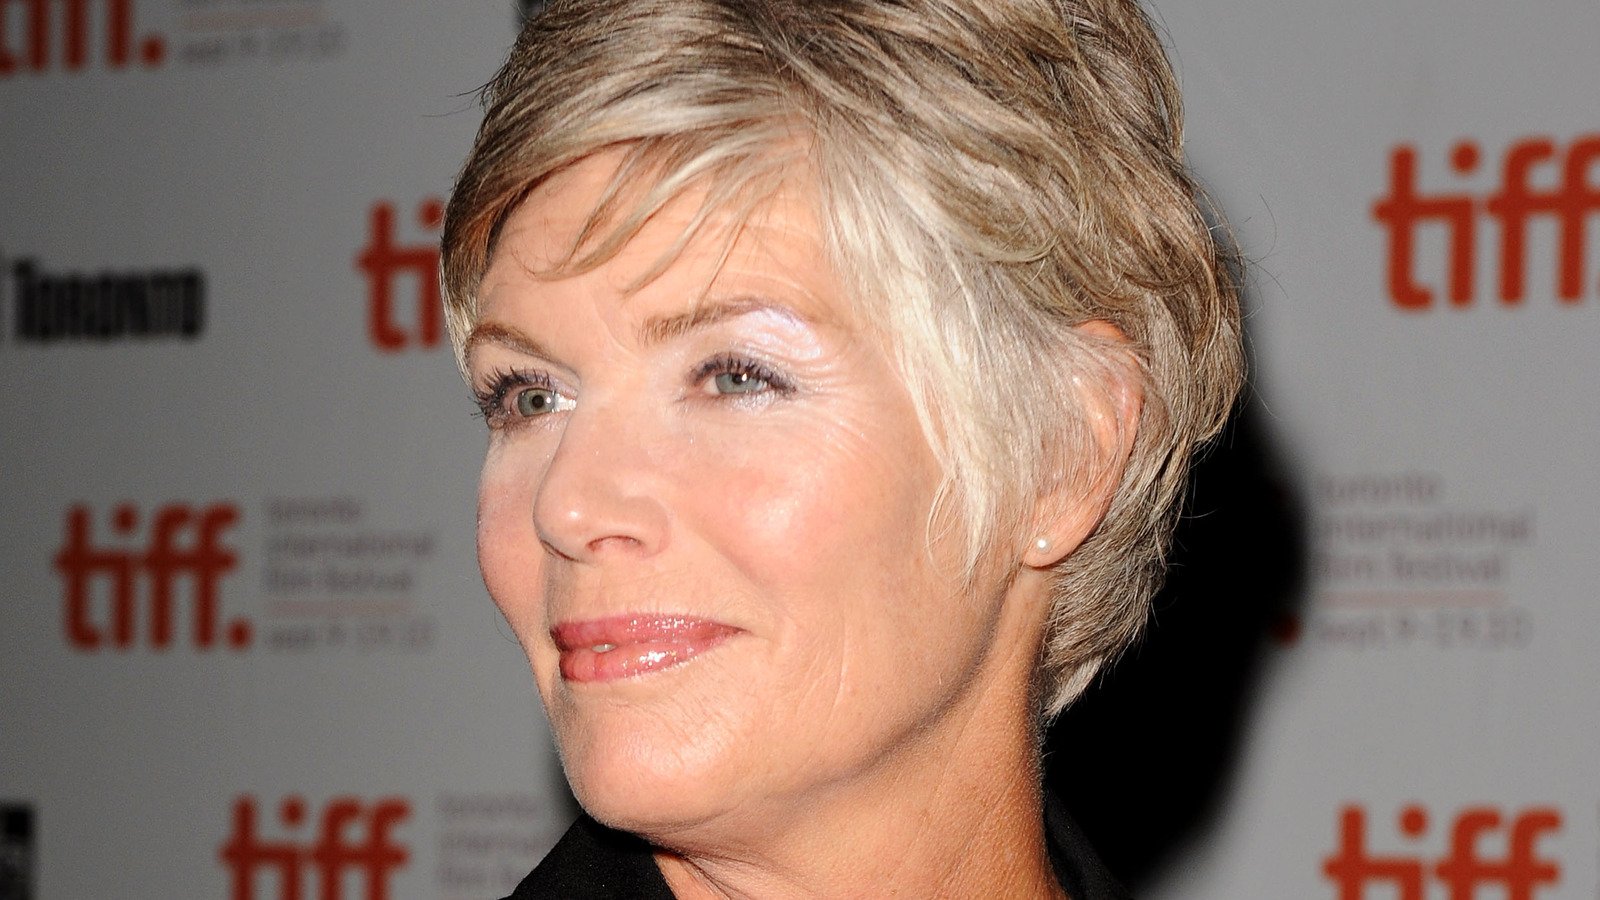 Top Gun's Kelly McGillis Confirms What We Suspected About Tom Cruise's On-Set Behavior